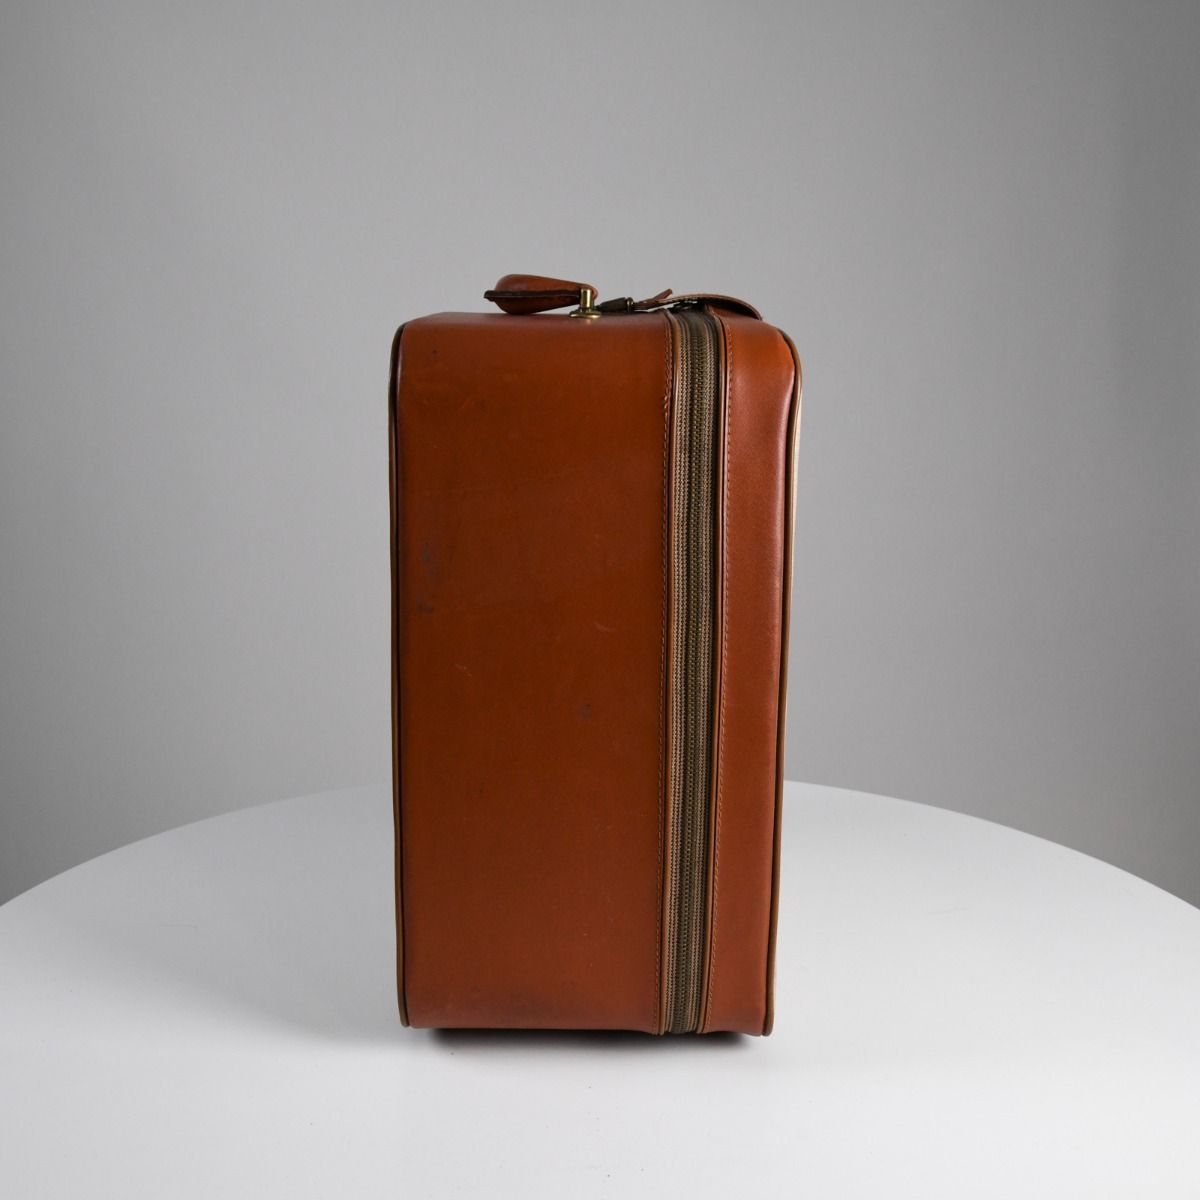 Vintage 1970s Kingfisher 'Airline' Leather Suitcase